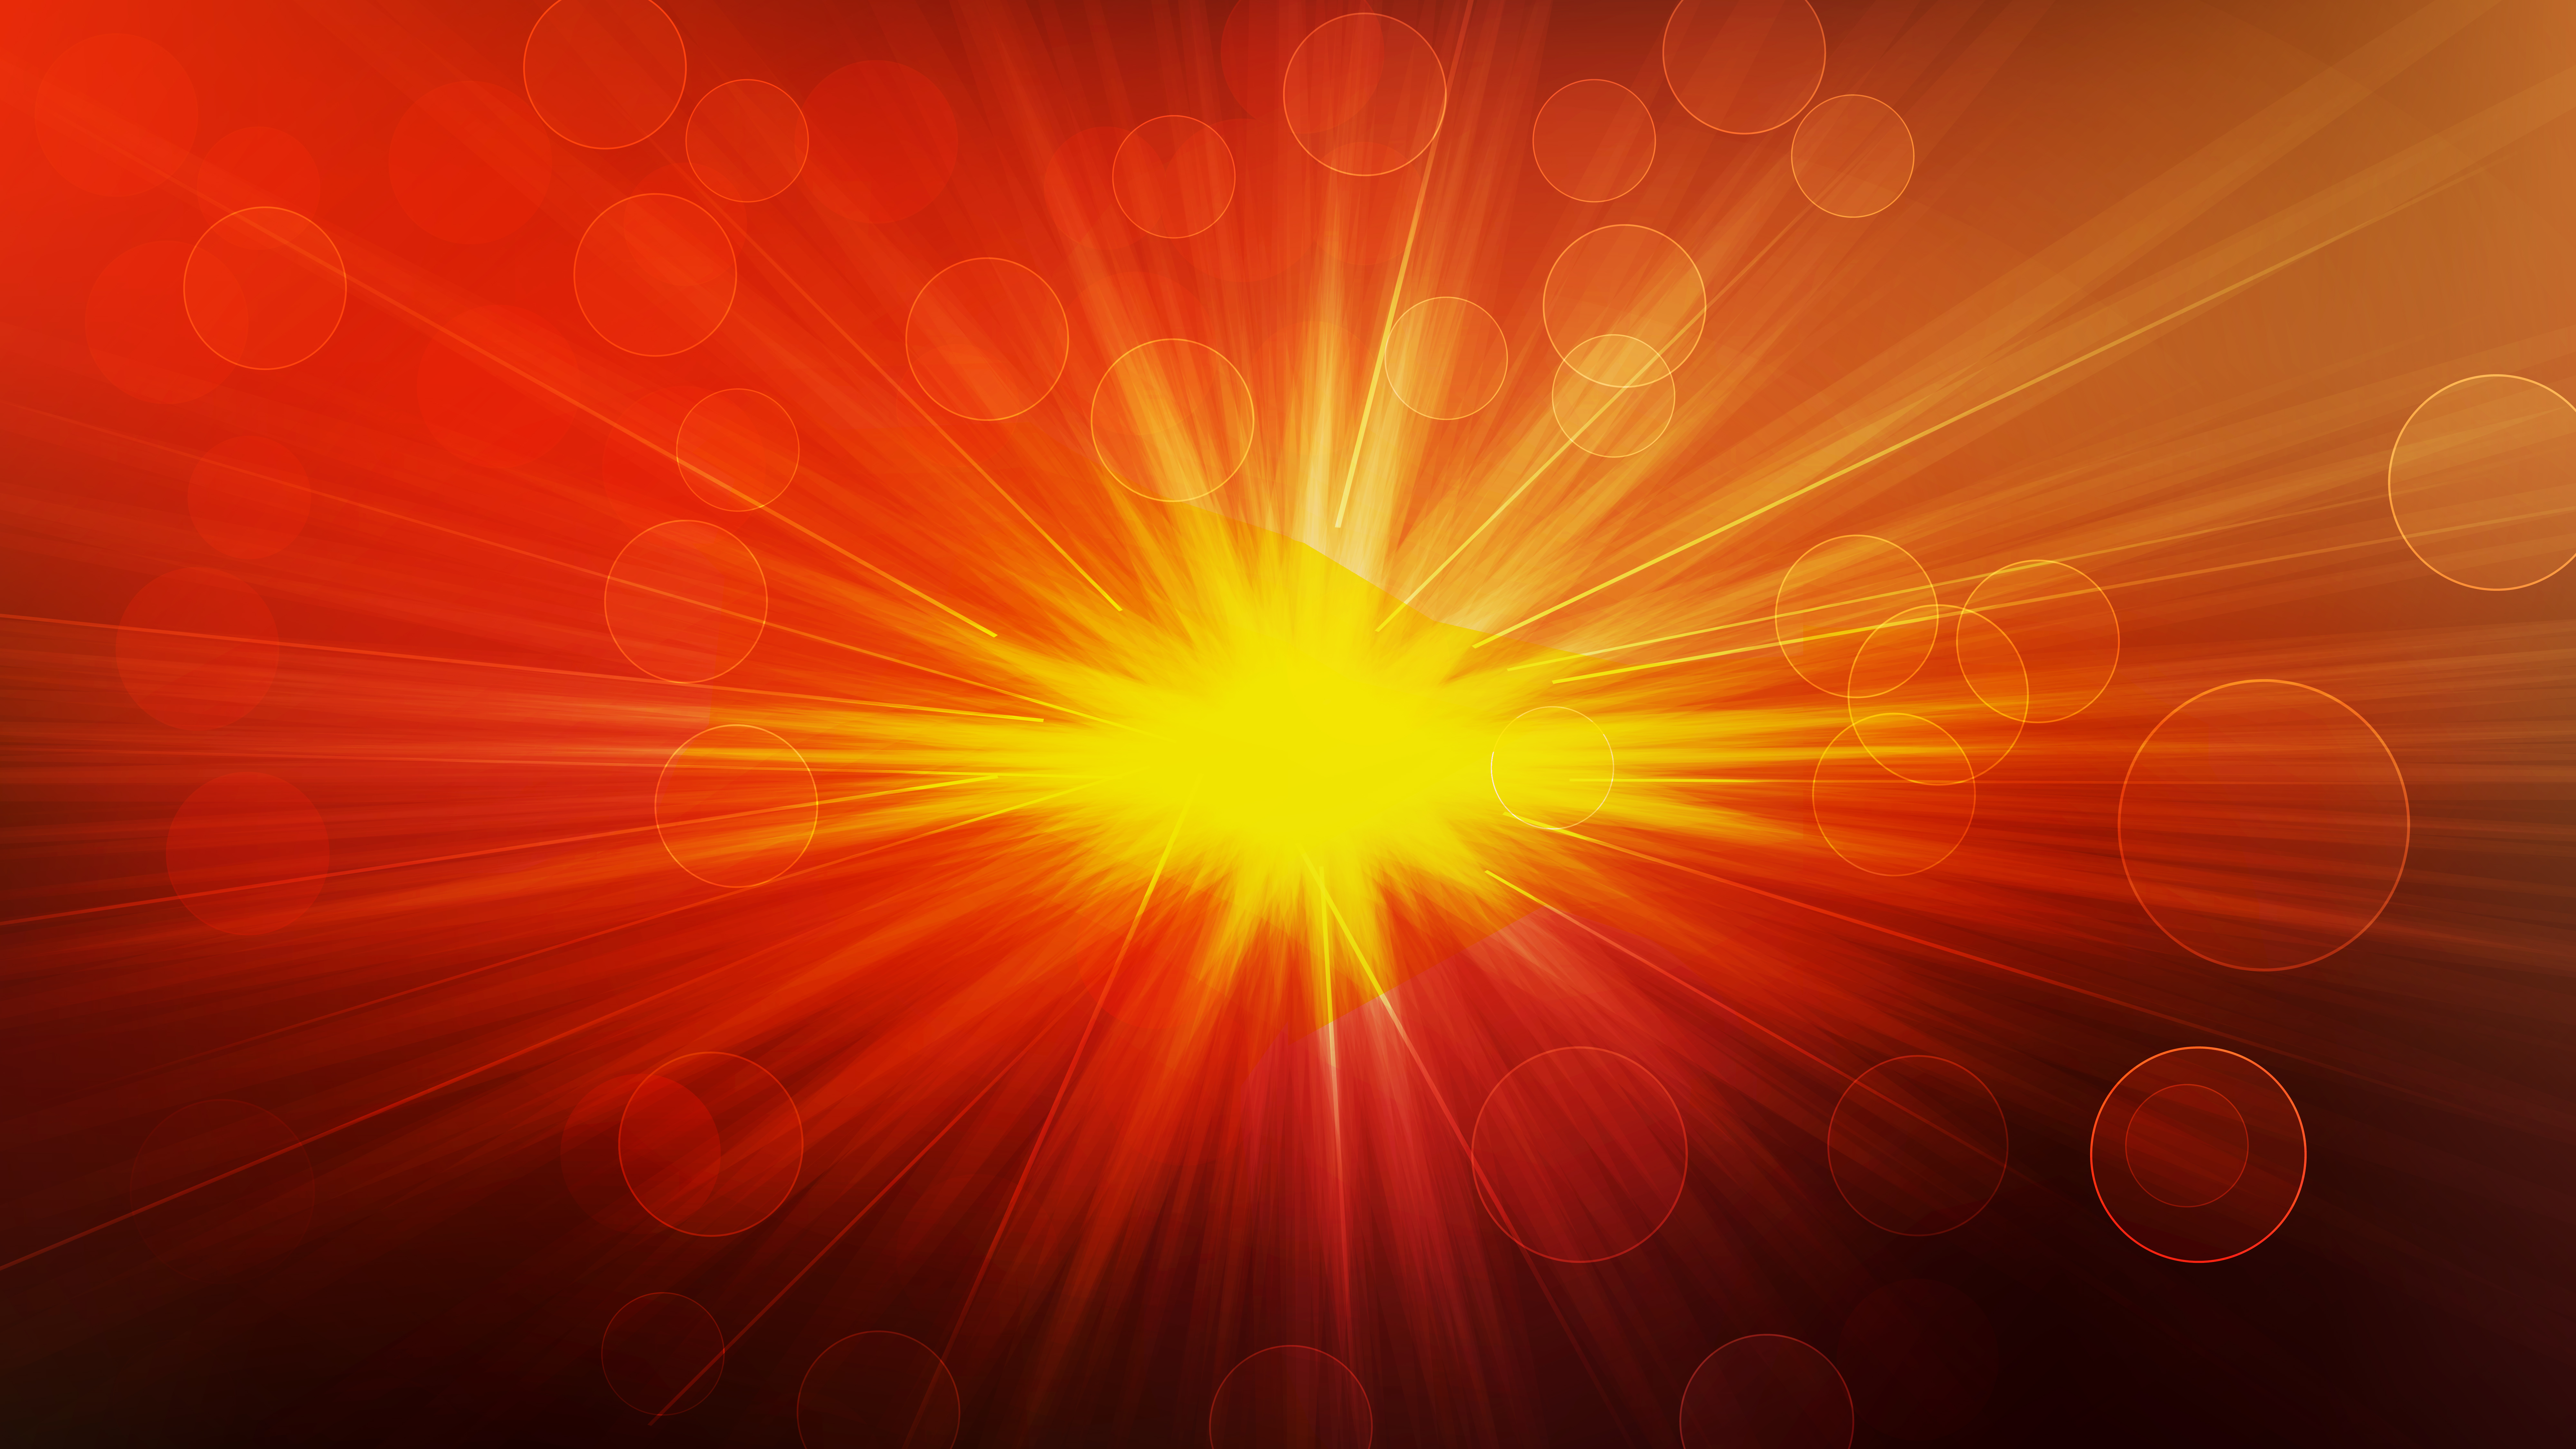 Free Abstract Black Red and Yellow Bokeh Defocused Lights with Rays  Background Vector Image